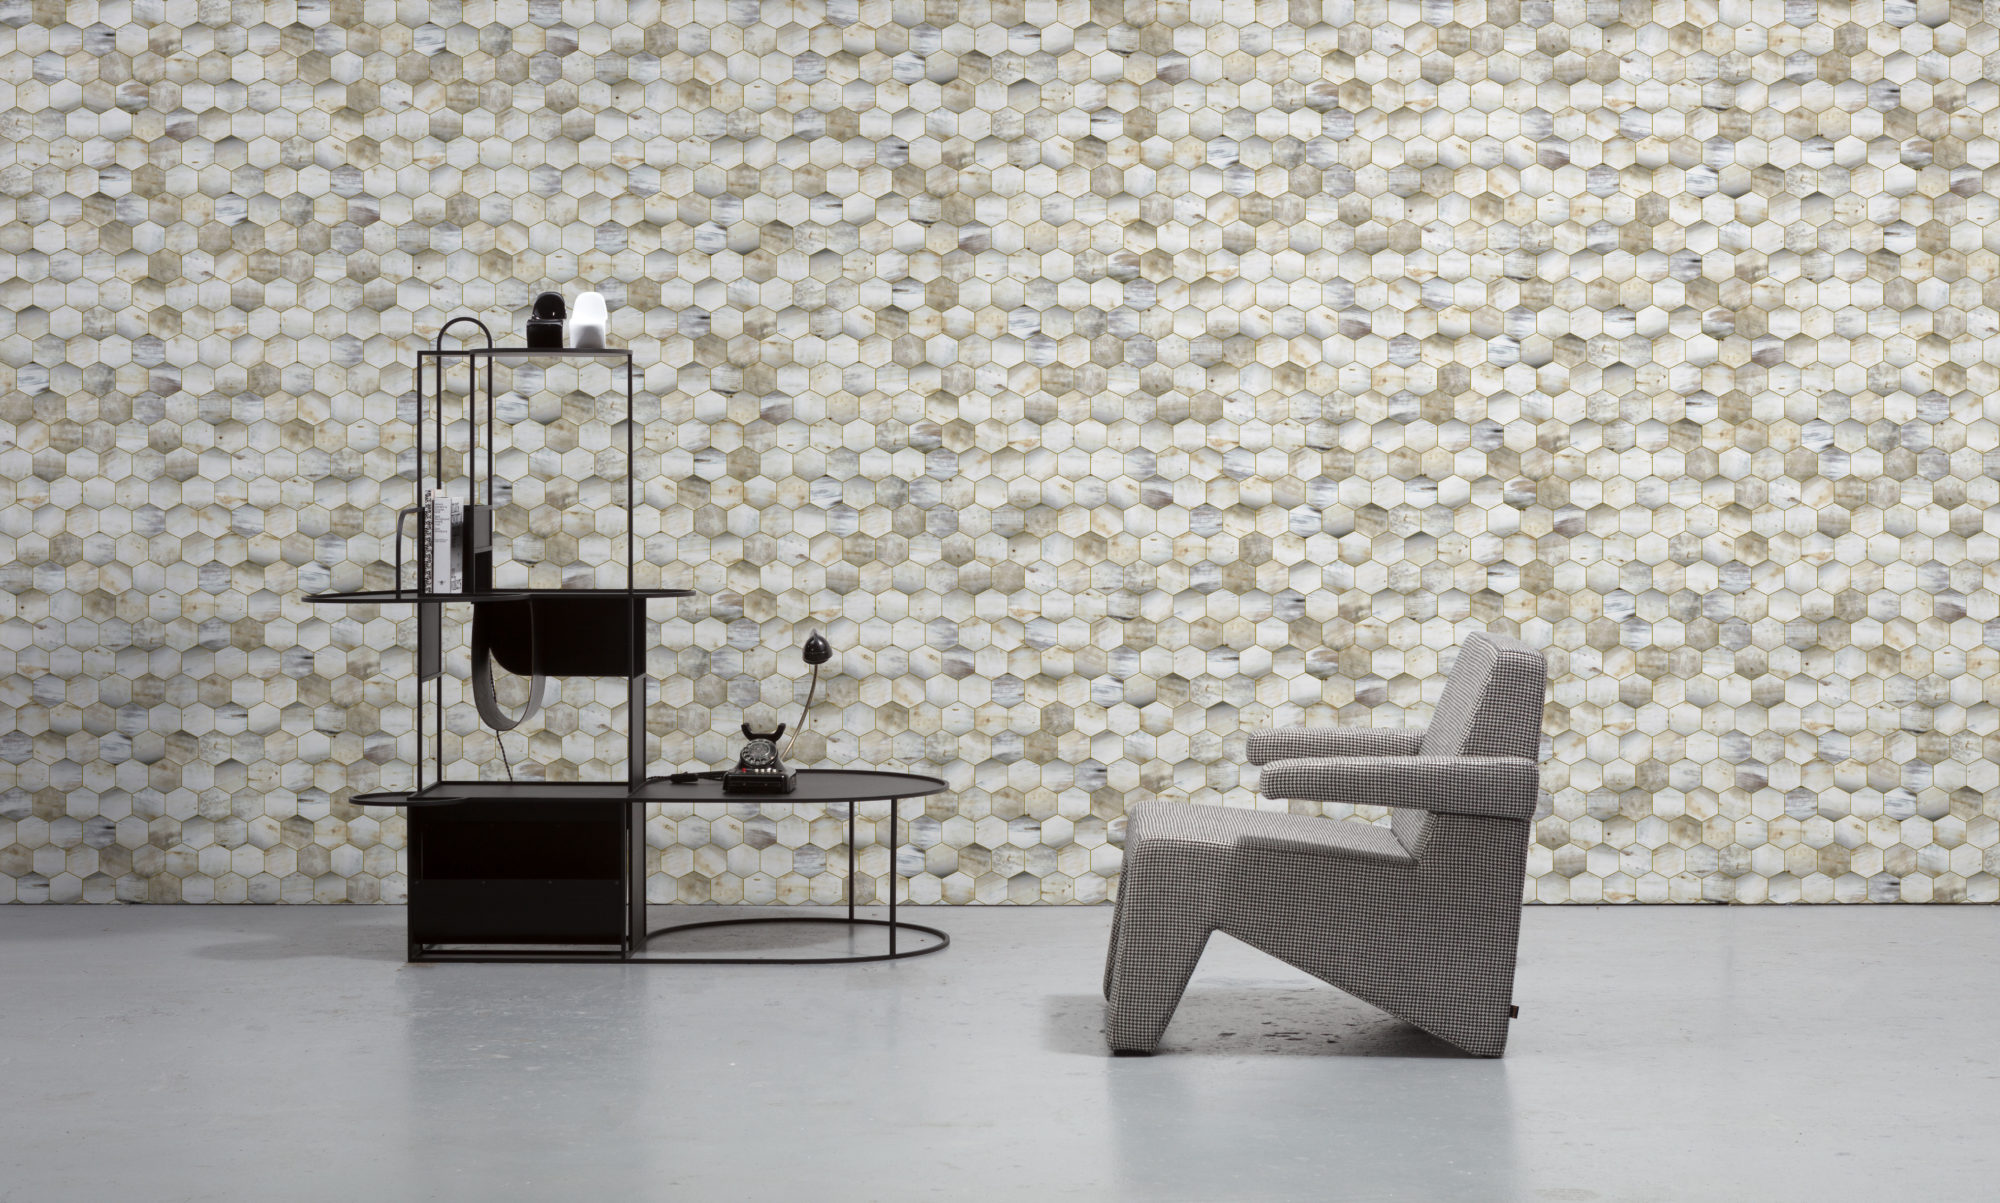 Wallpaper and Wallcoverings